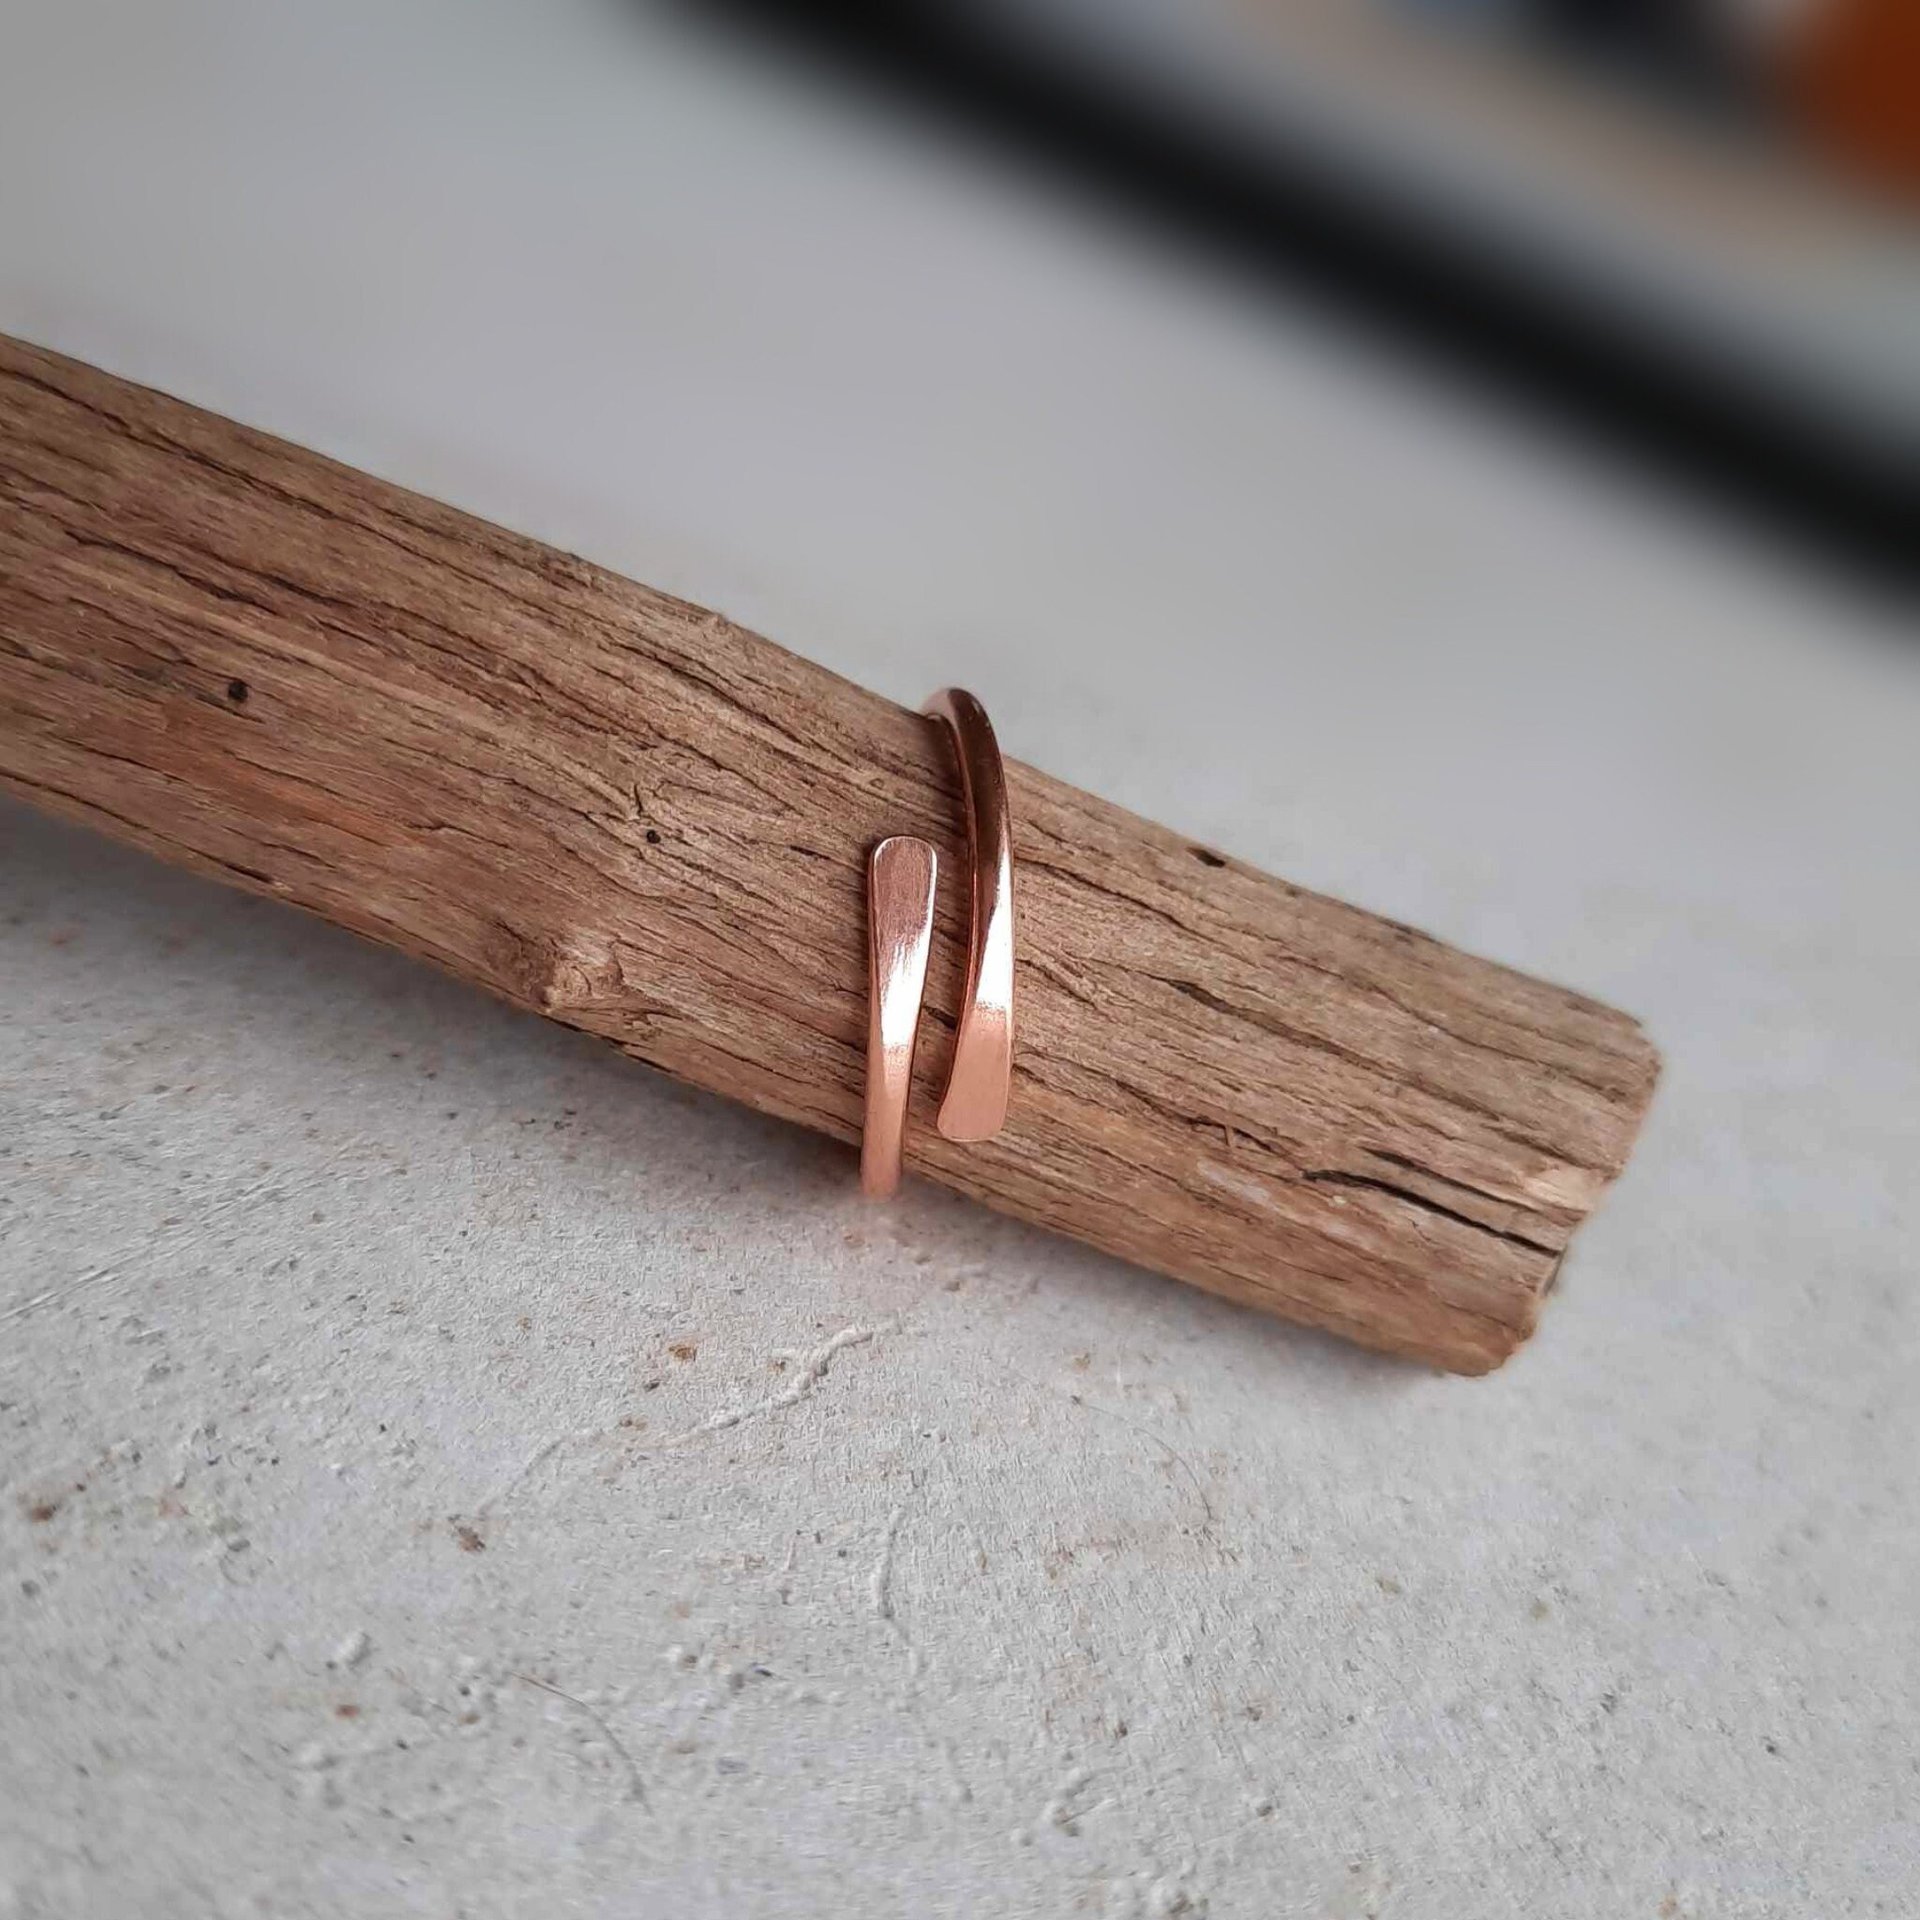 Dainty, adjustable copper wraparound ring, hand crafted by The Tiny Tree Frog Jewellery